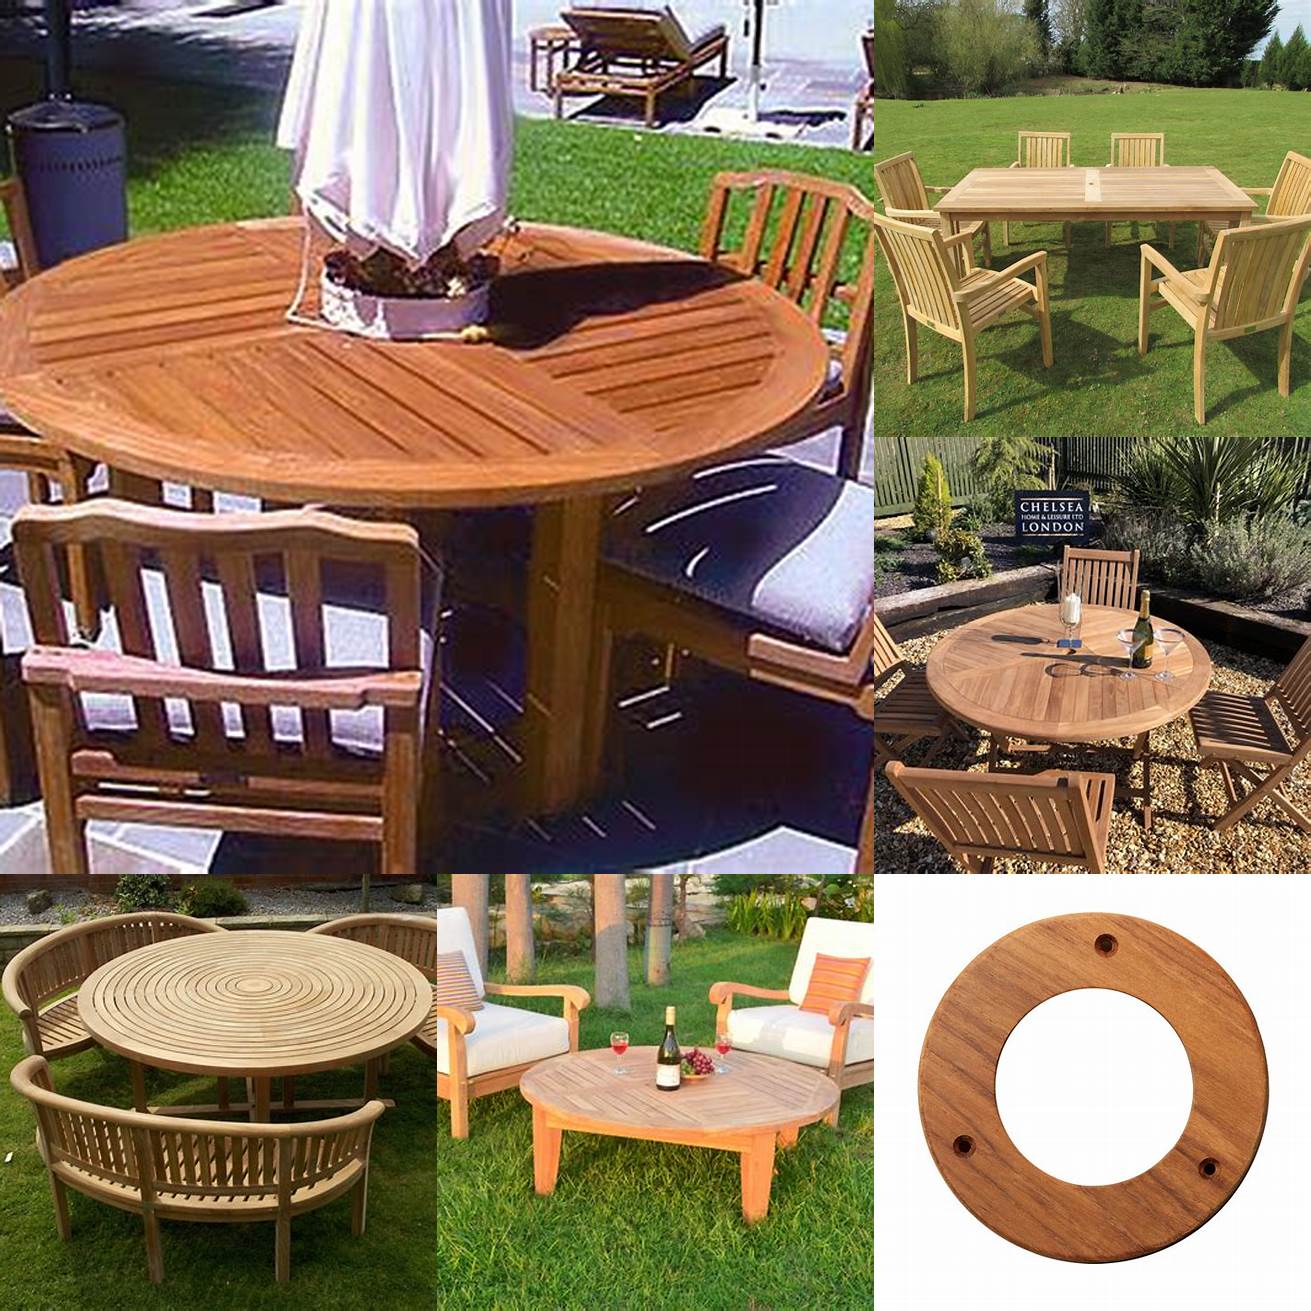 A picture of teak furniture with rings